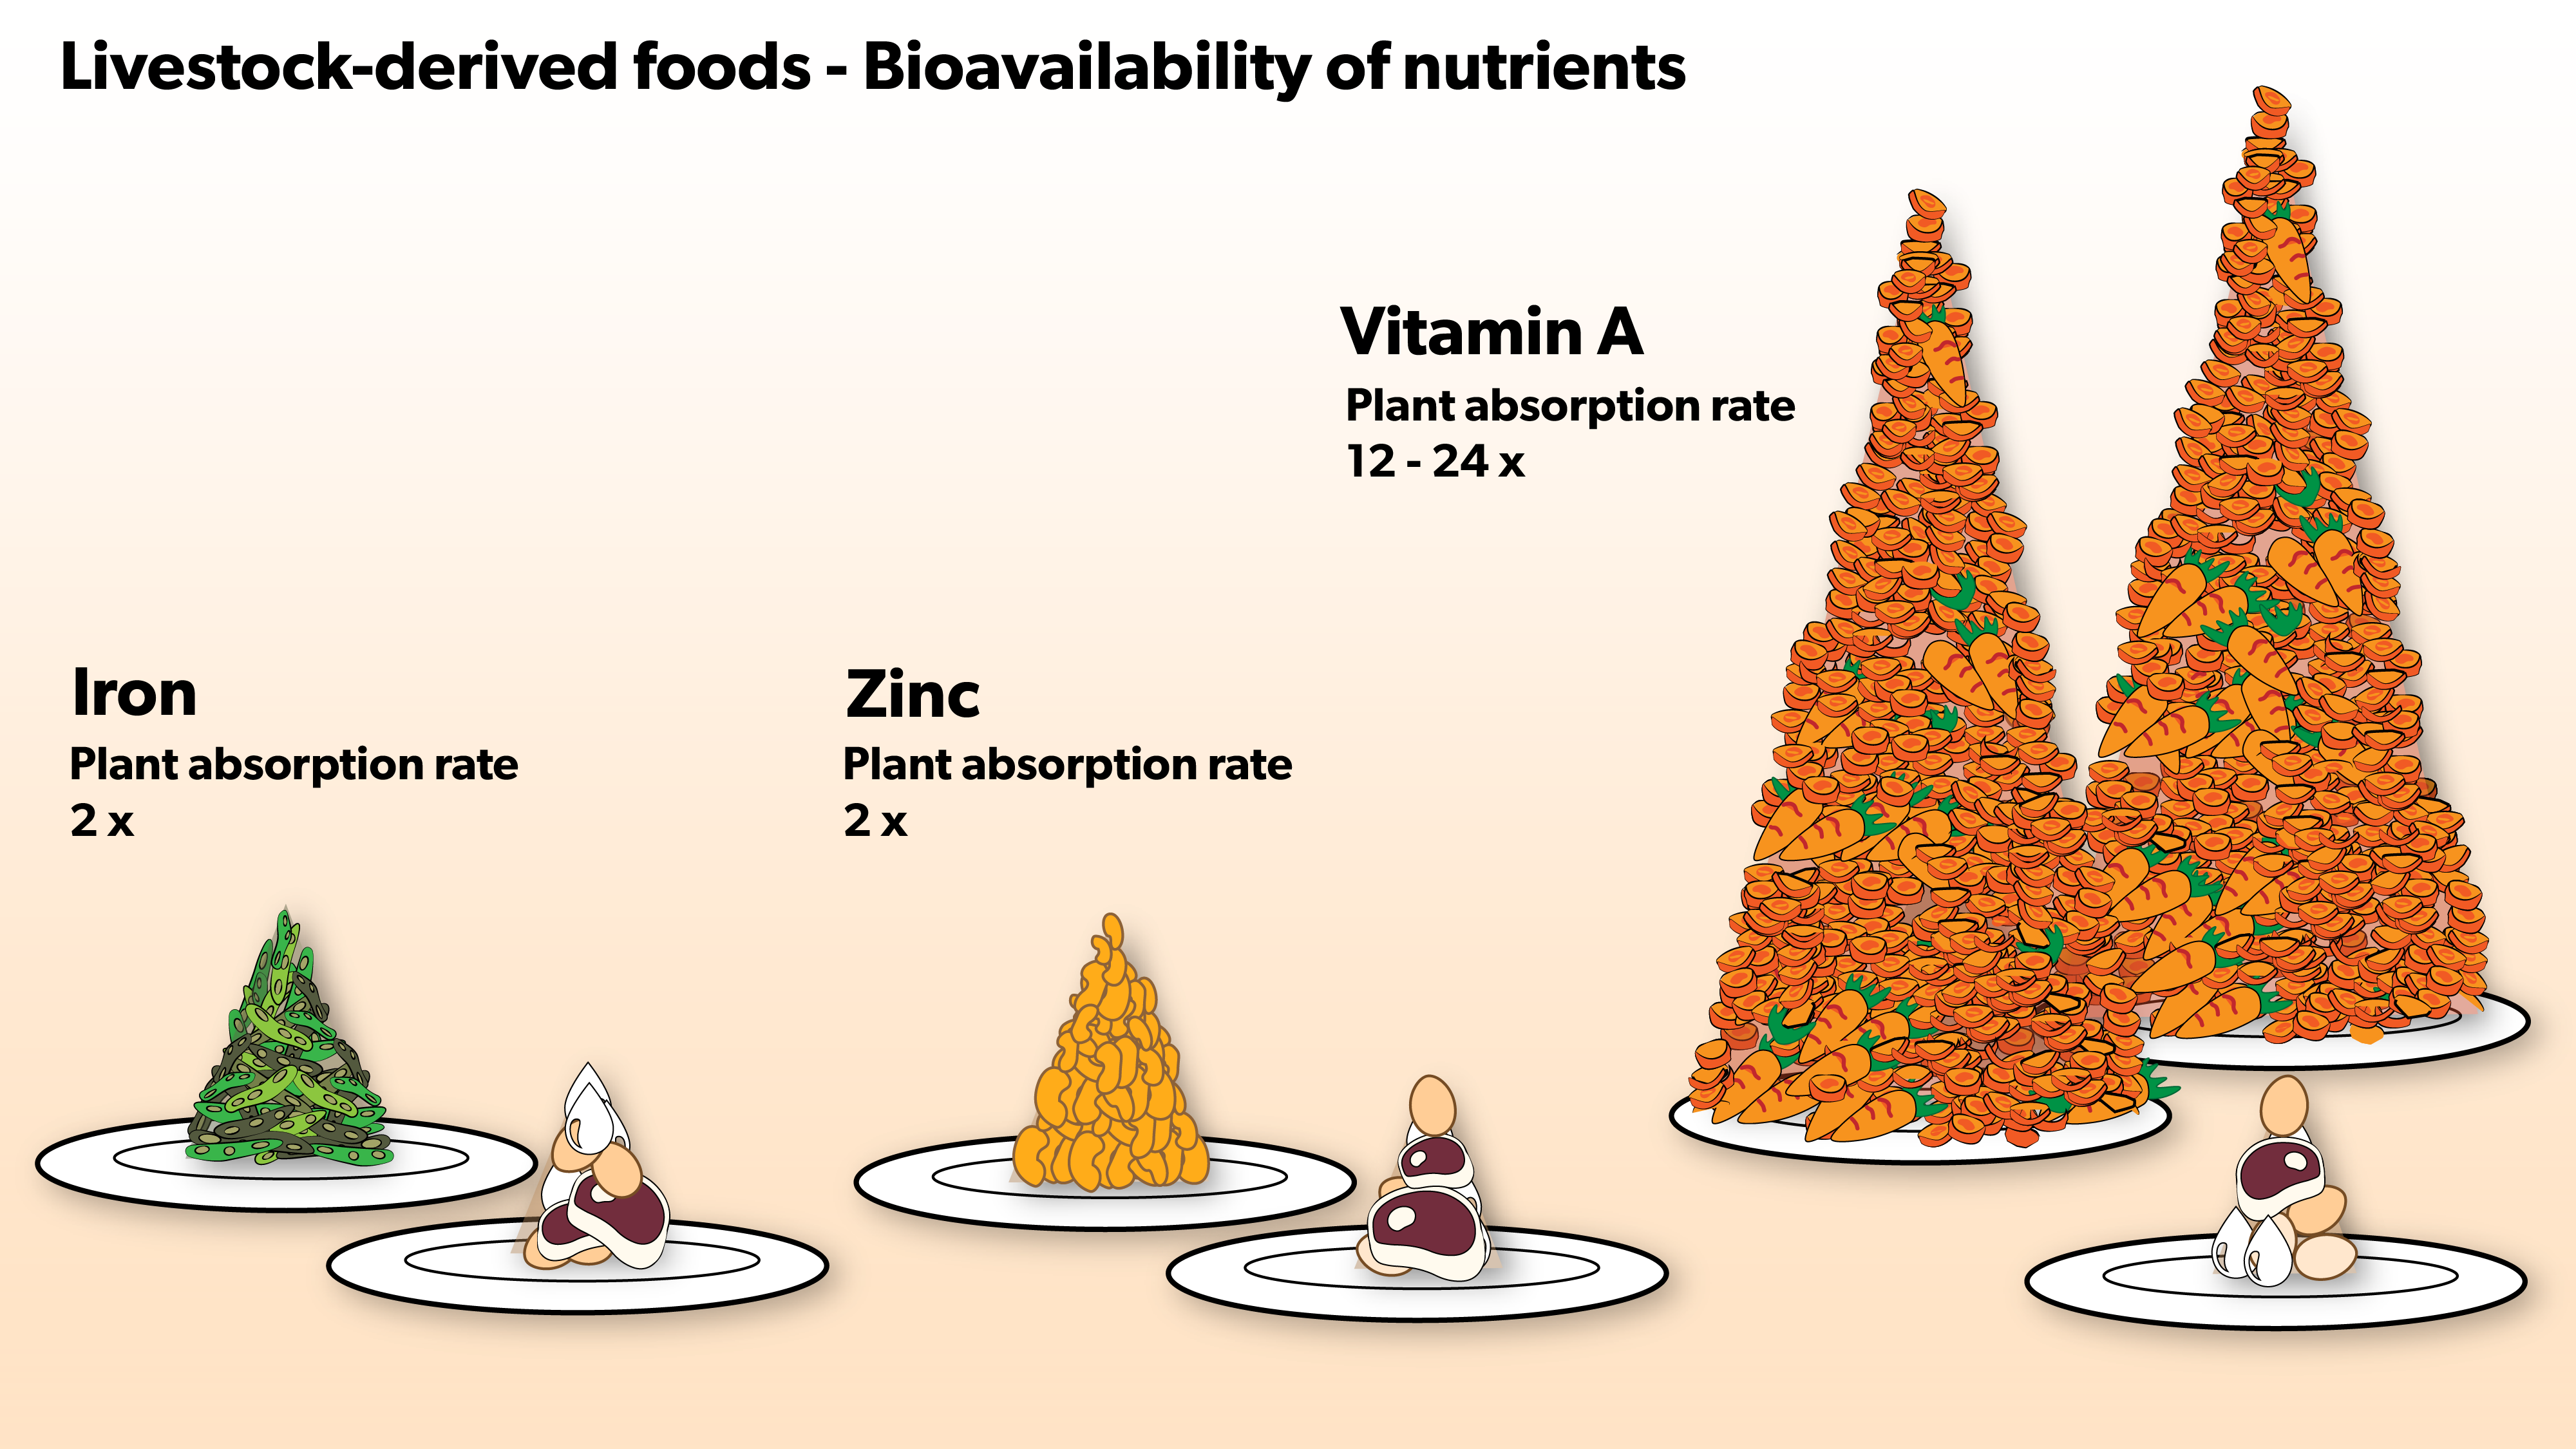 Livestock-derived foods - Bioavailability of nutrients